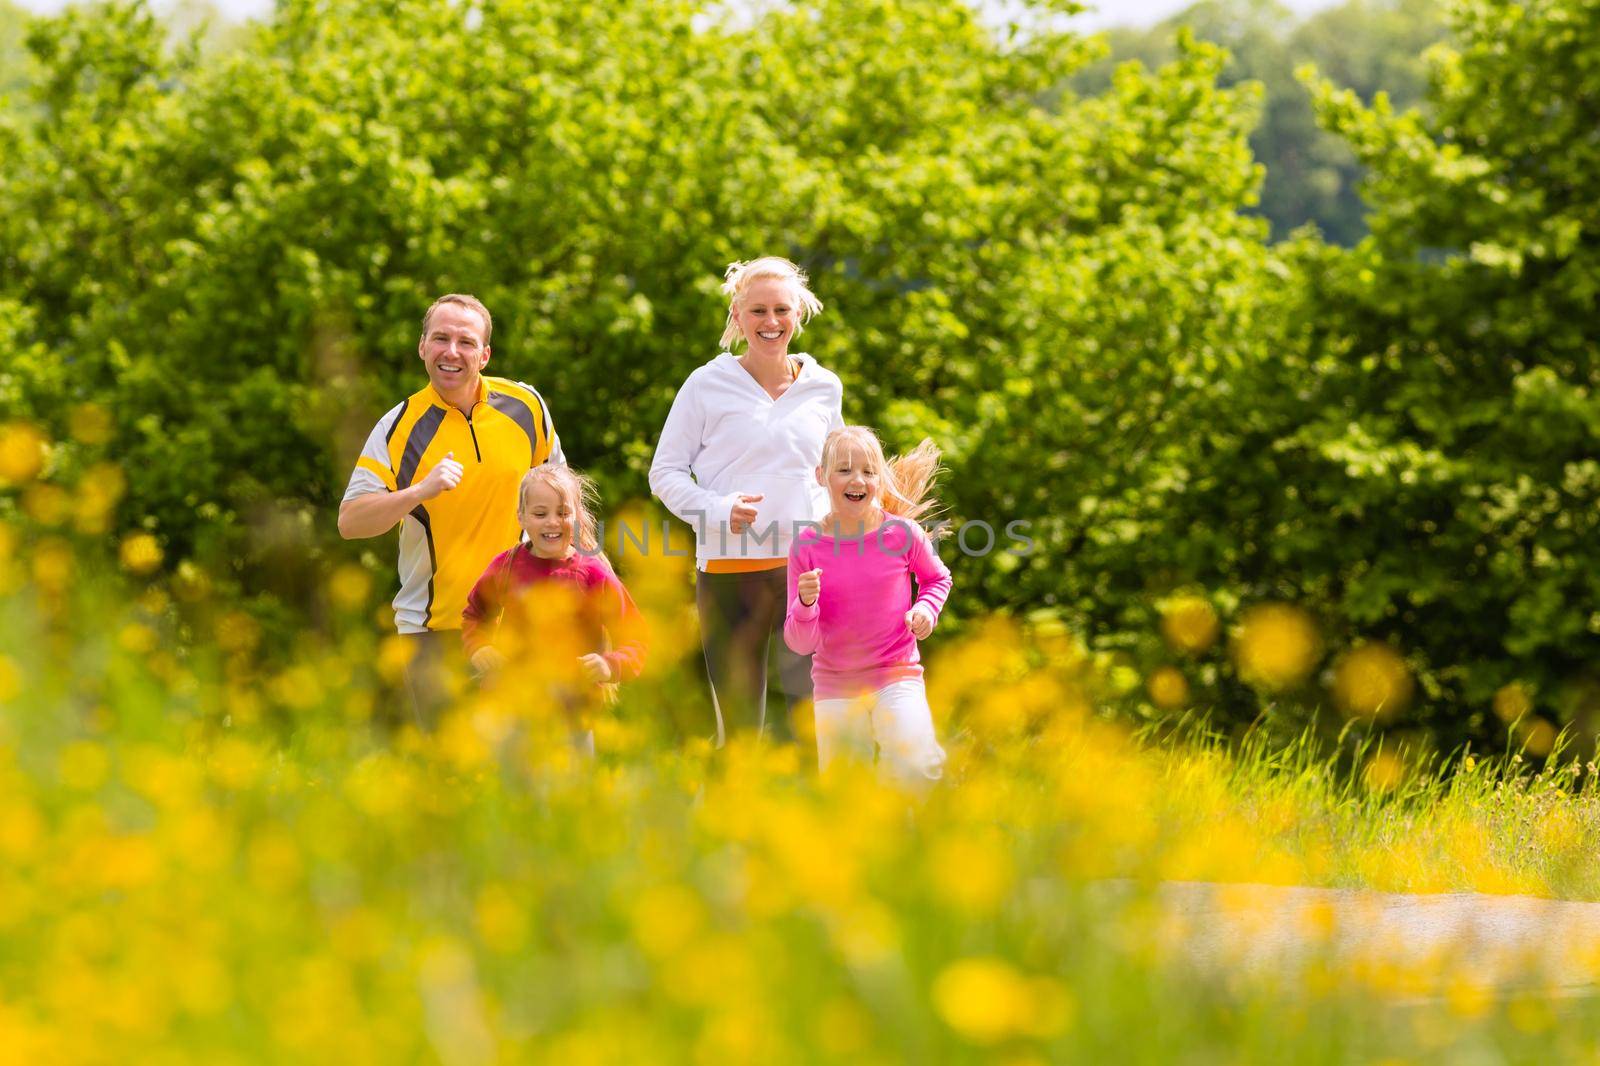 Happy Family with two girls running or jogging for sport and better fitness in a meadow in summer